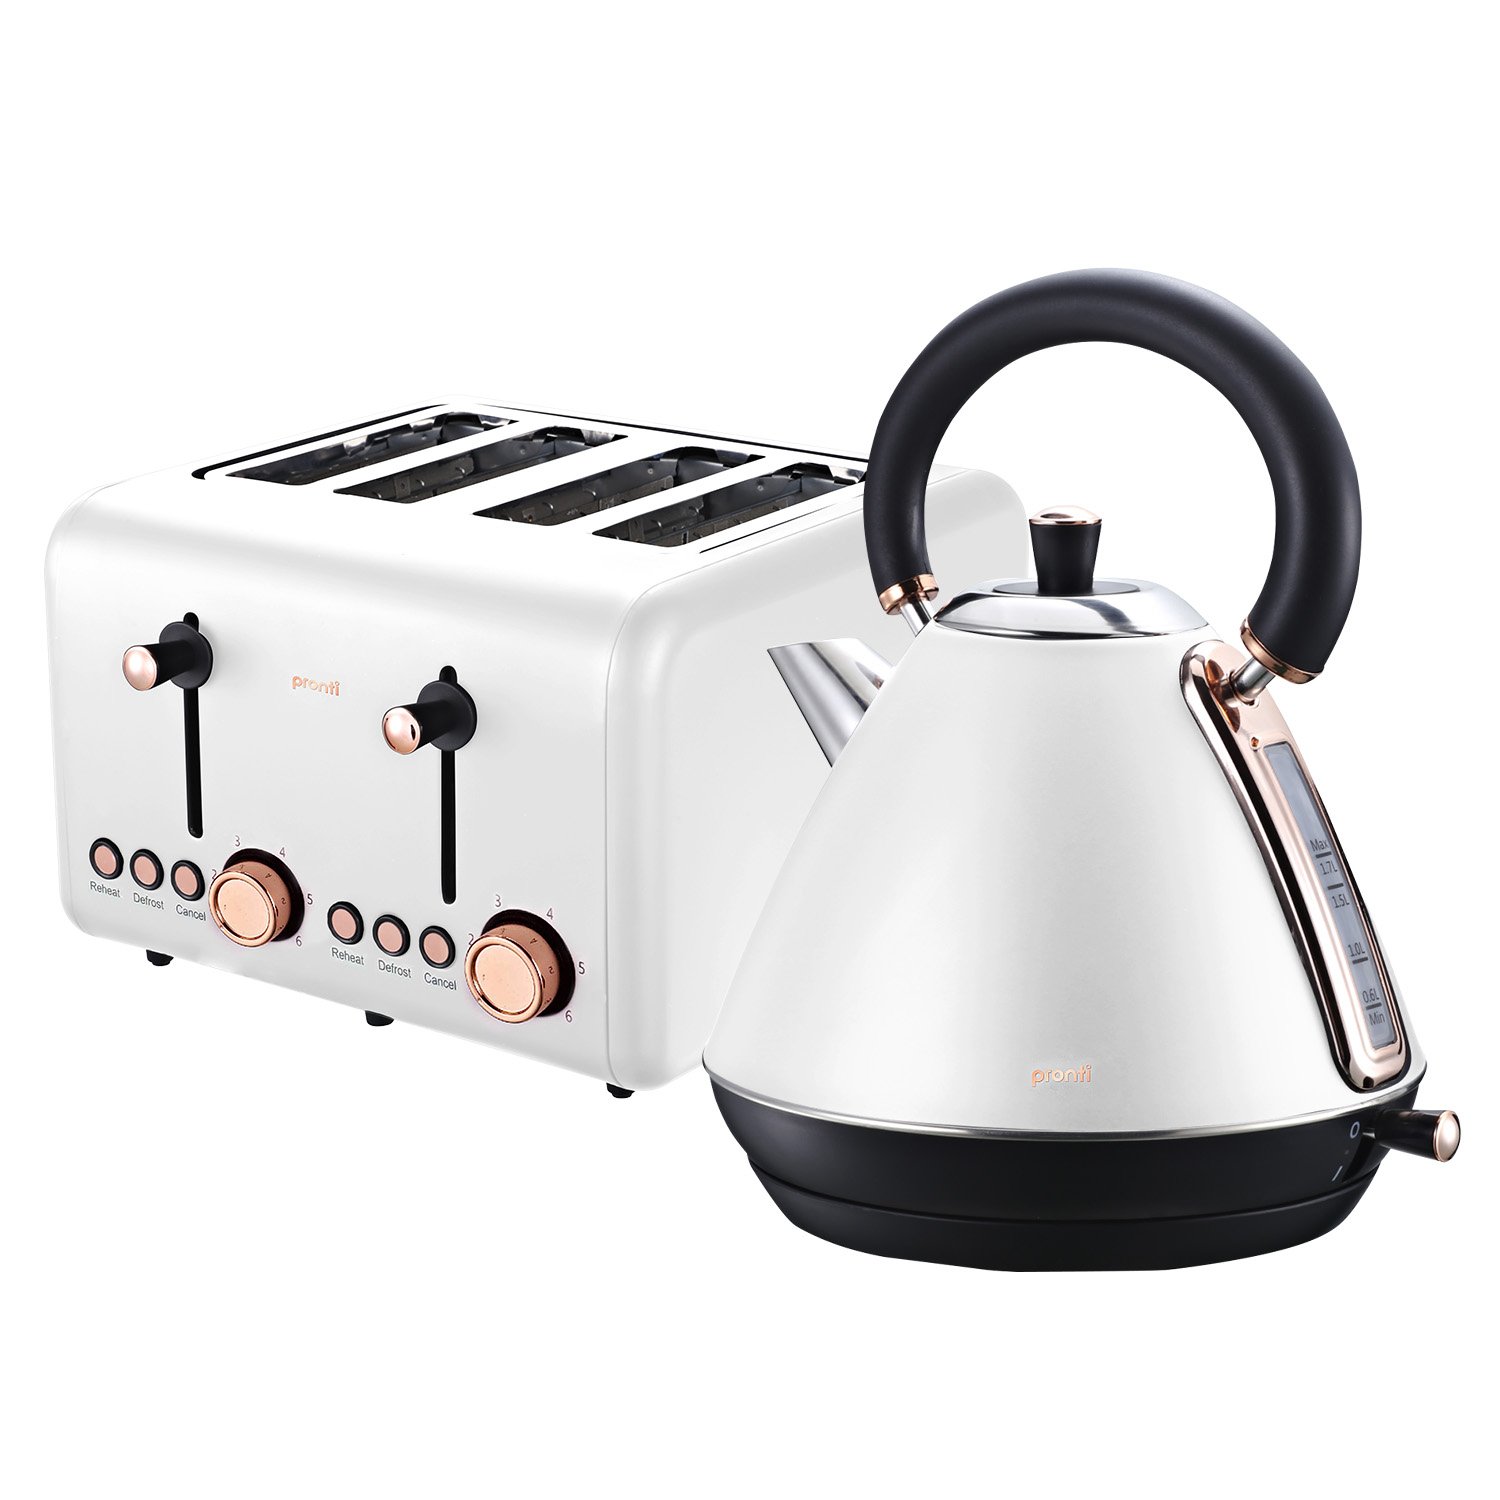 Pronti Rose Trim Collection Toaster & Kettle Bundle - White 1